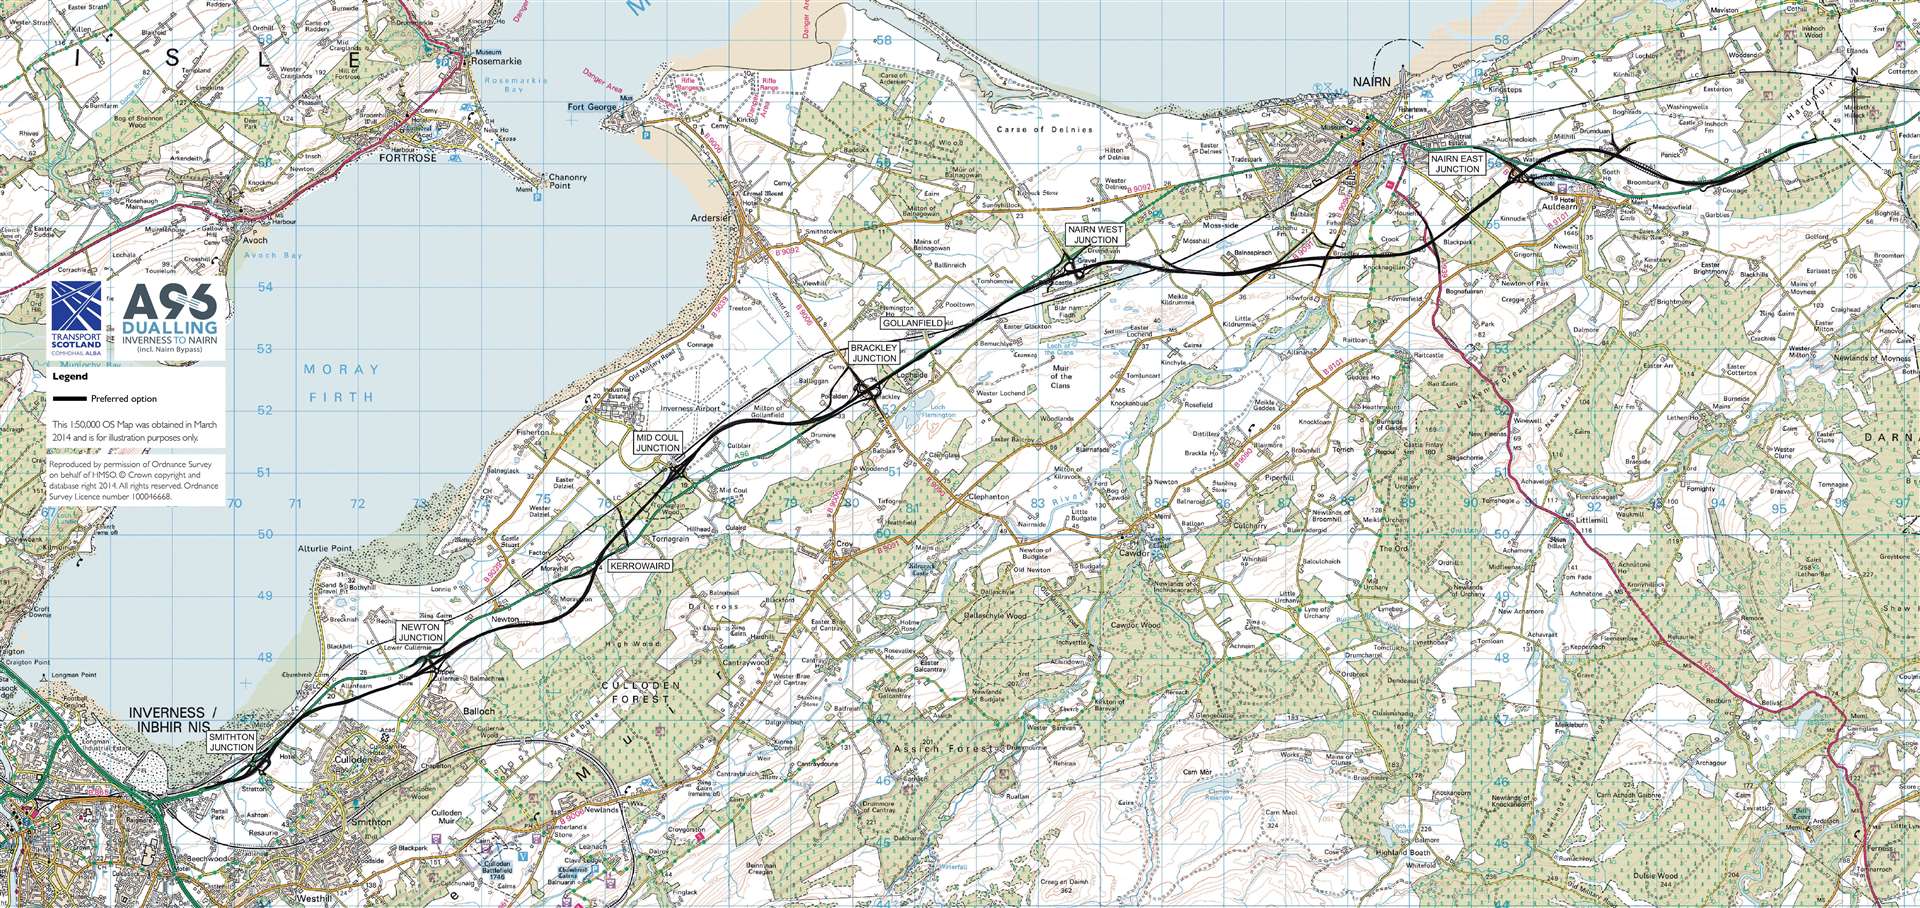 The proposed route (in black) of the new A96 dual carriageway between Inverness and Nairn and the Nairn bypass..